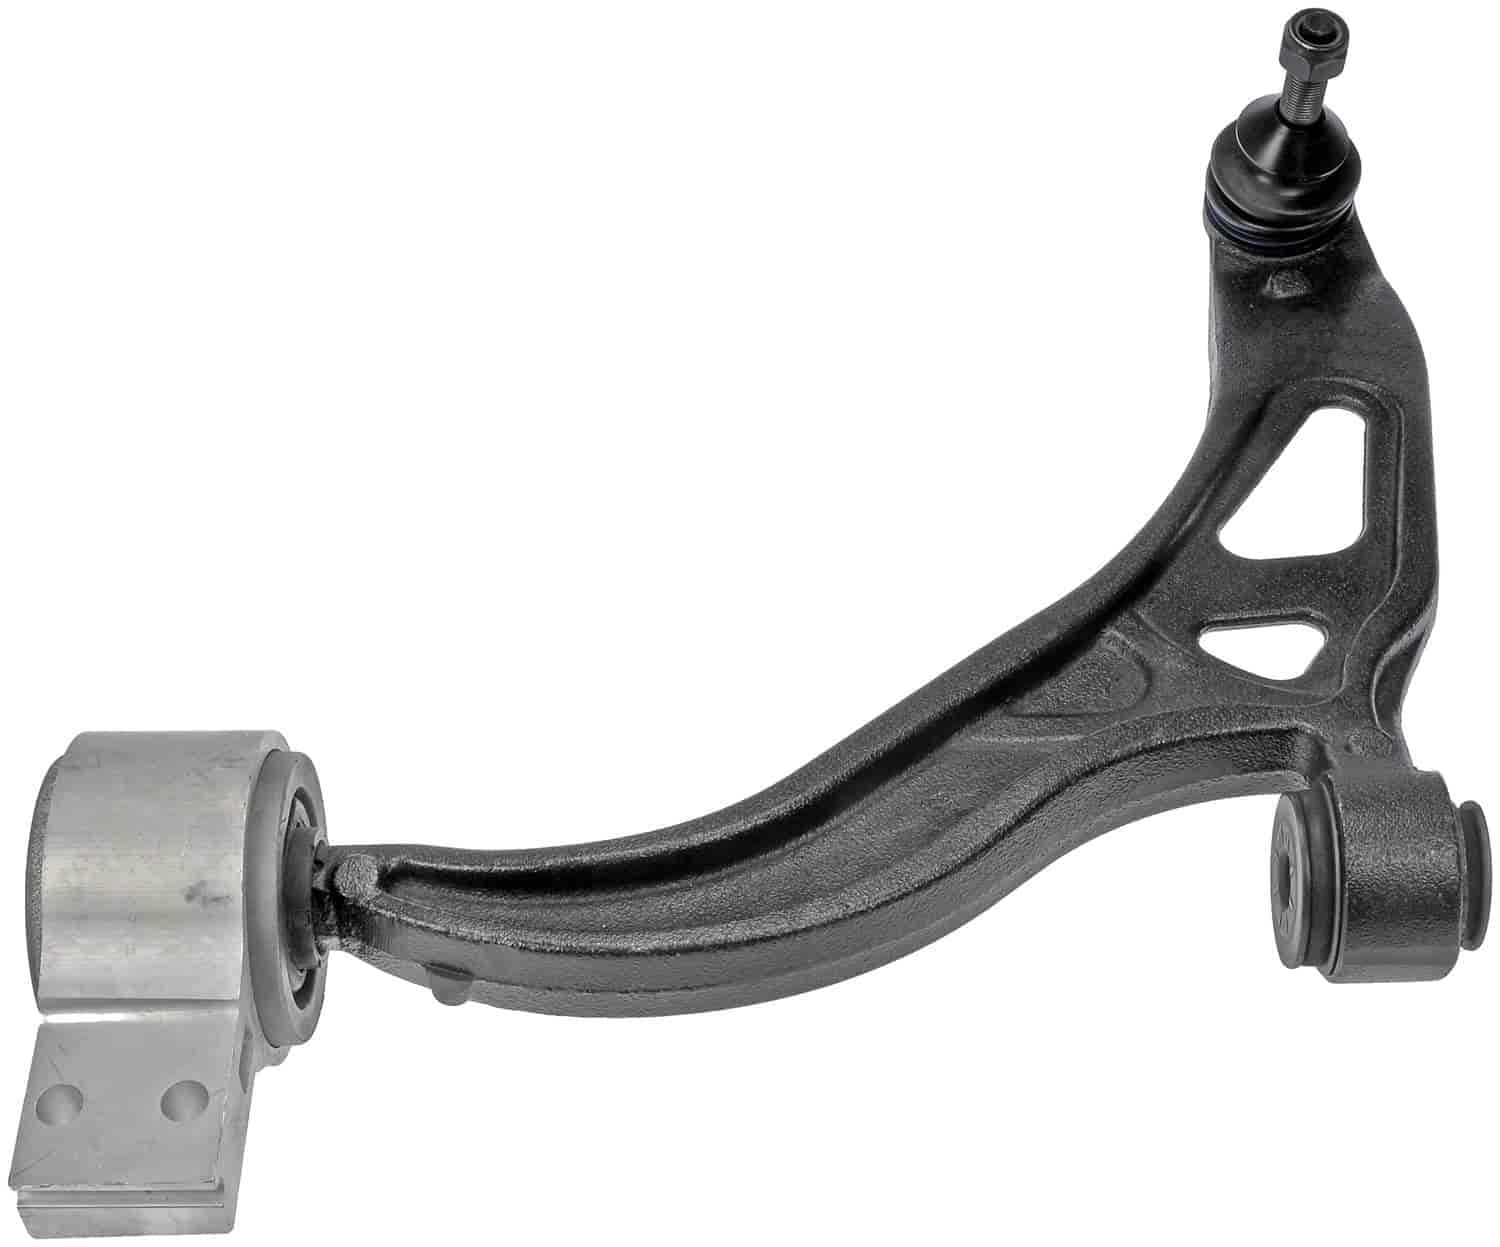 Lower Control Arm 2011-2017 Ford Explorer, 2013-2015 Ford Police Interceptor Utility - Front Left